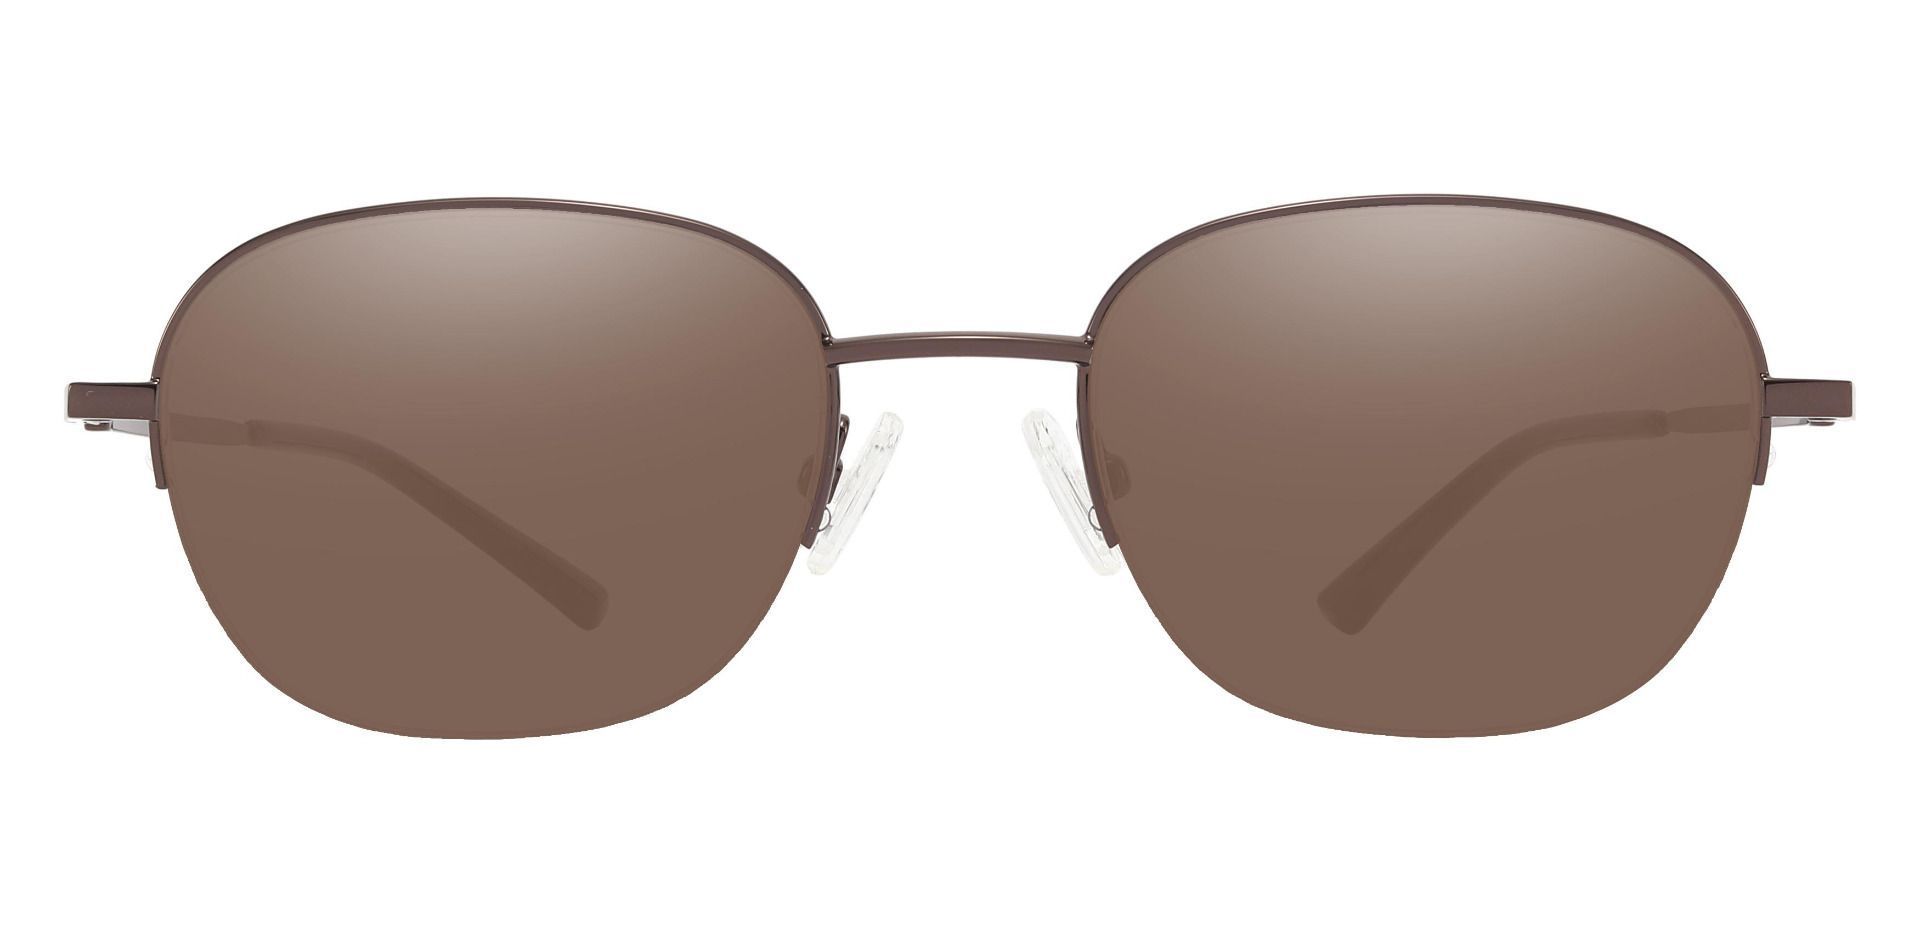 Rochester Oval Reading Sunglasses - Brown Frame With Brown Lenses